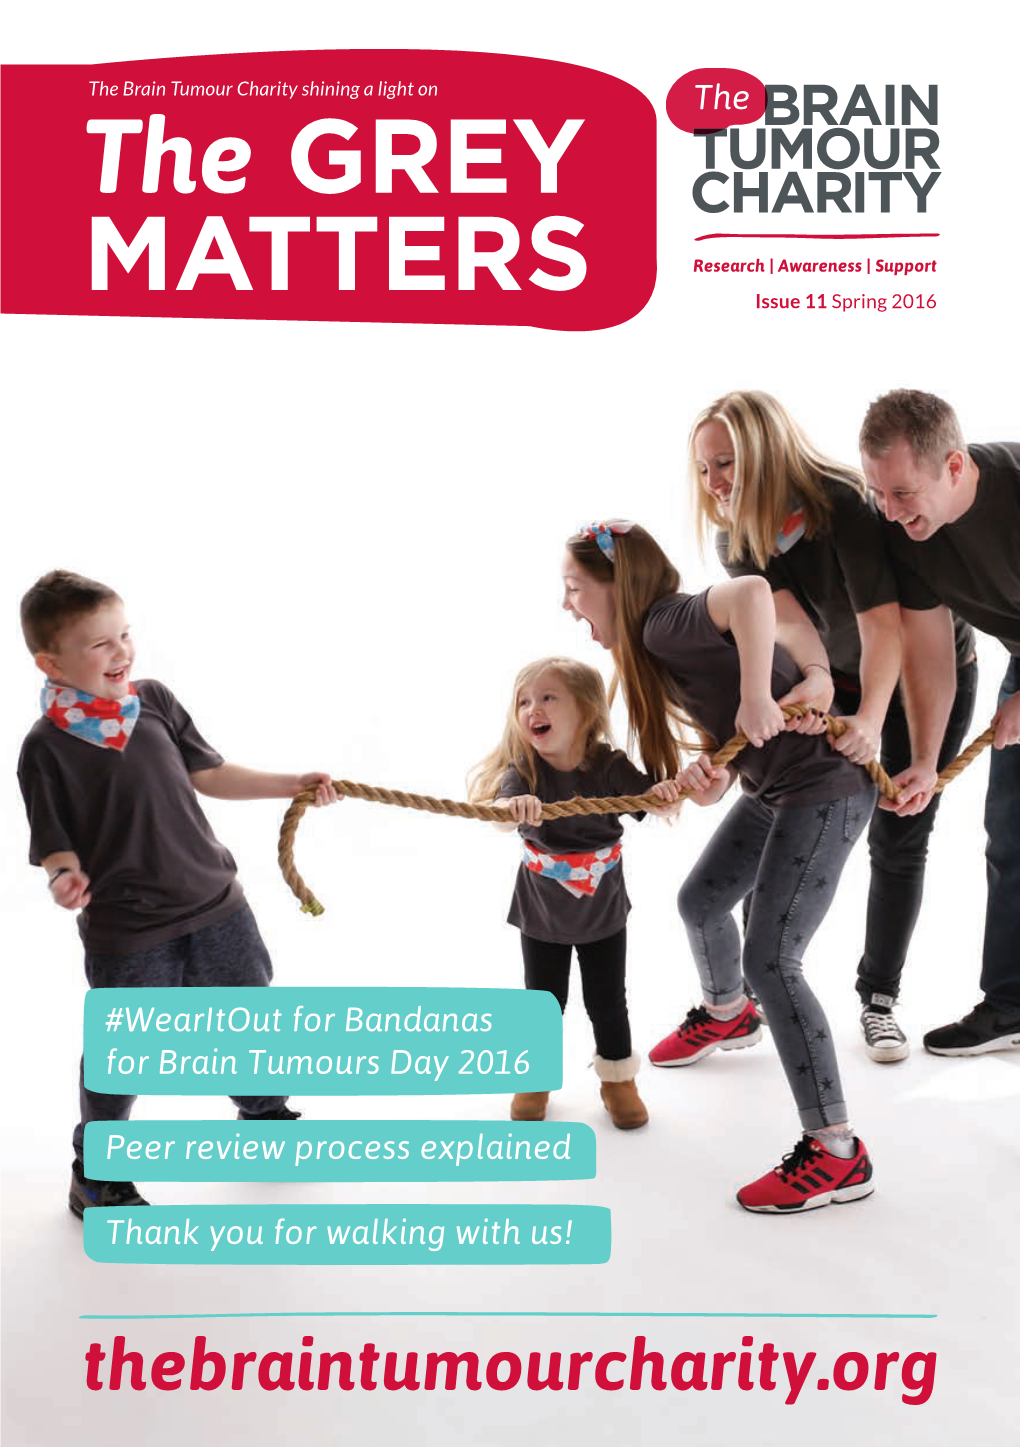 The GREY MATTERS Research | Awareness | Support Issue 11 Spring 2016